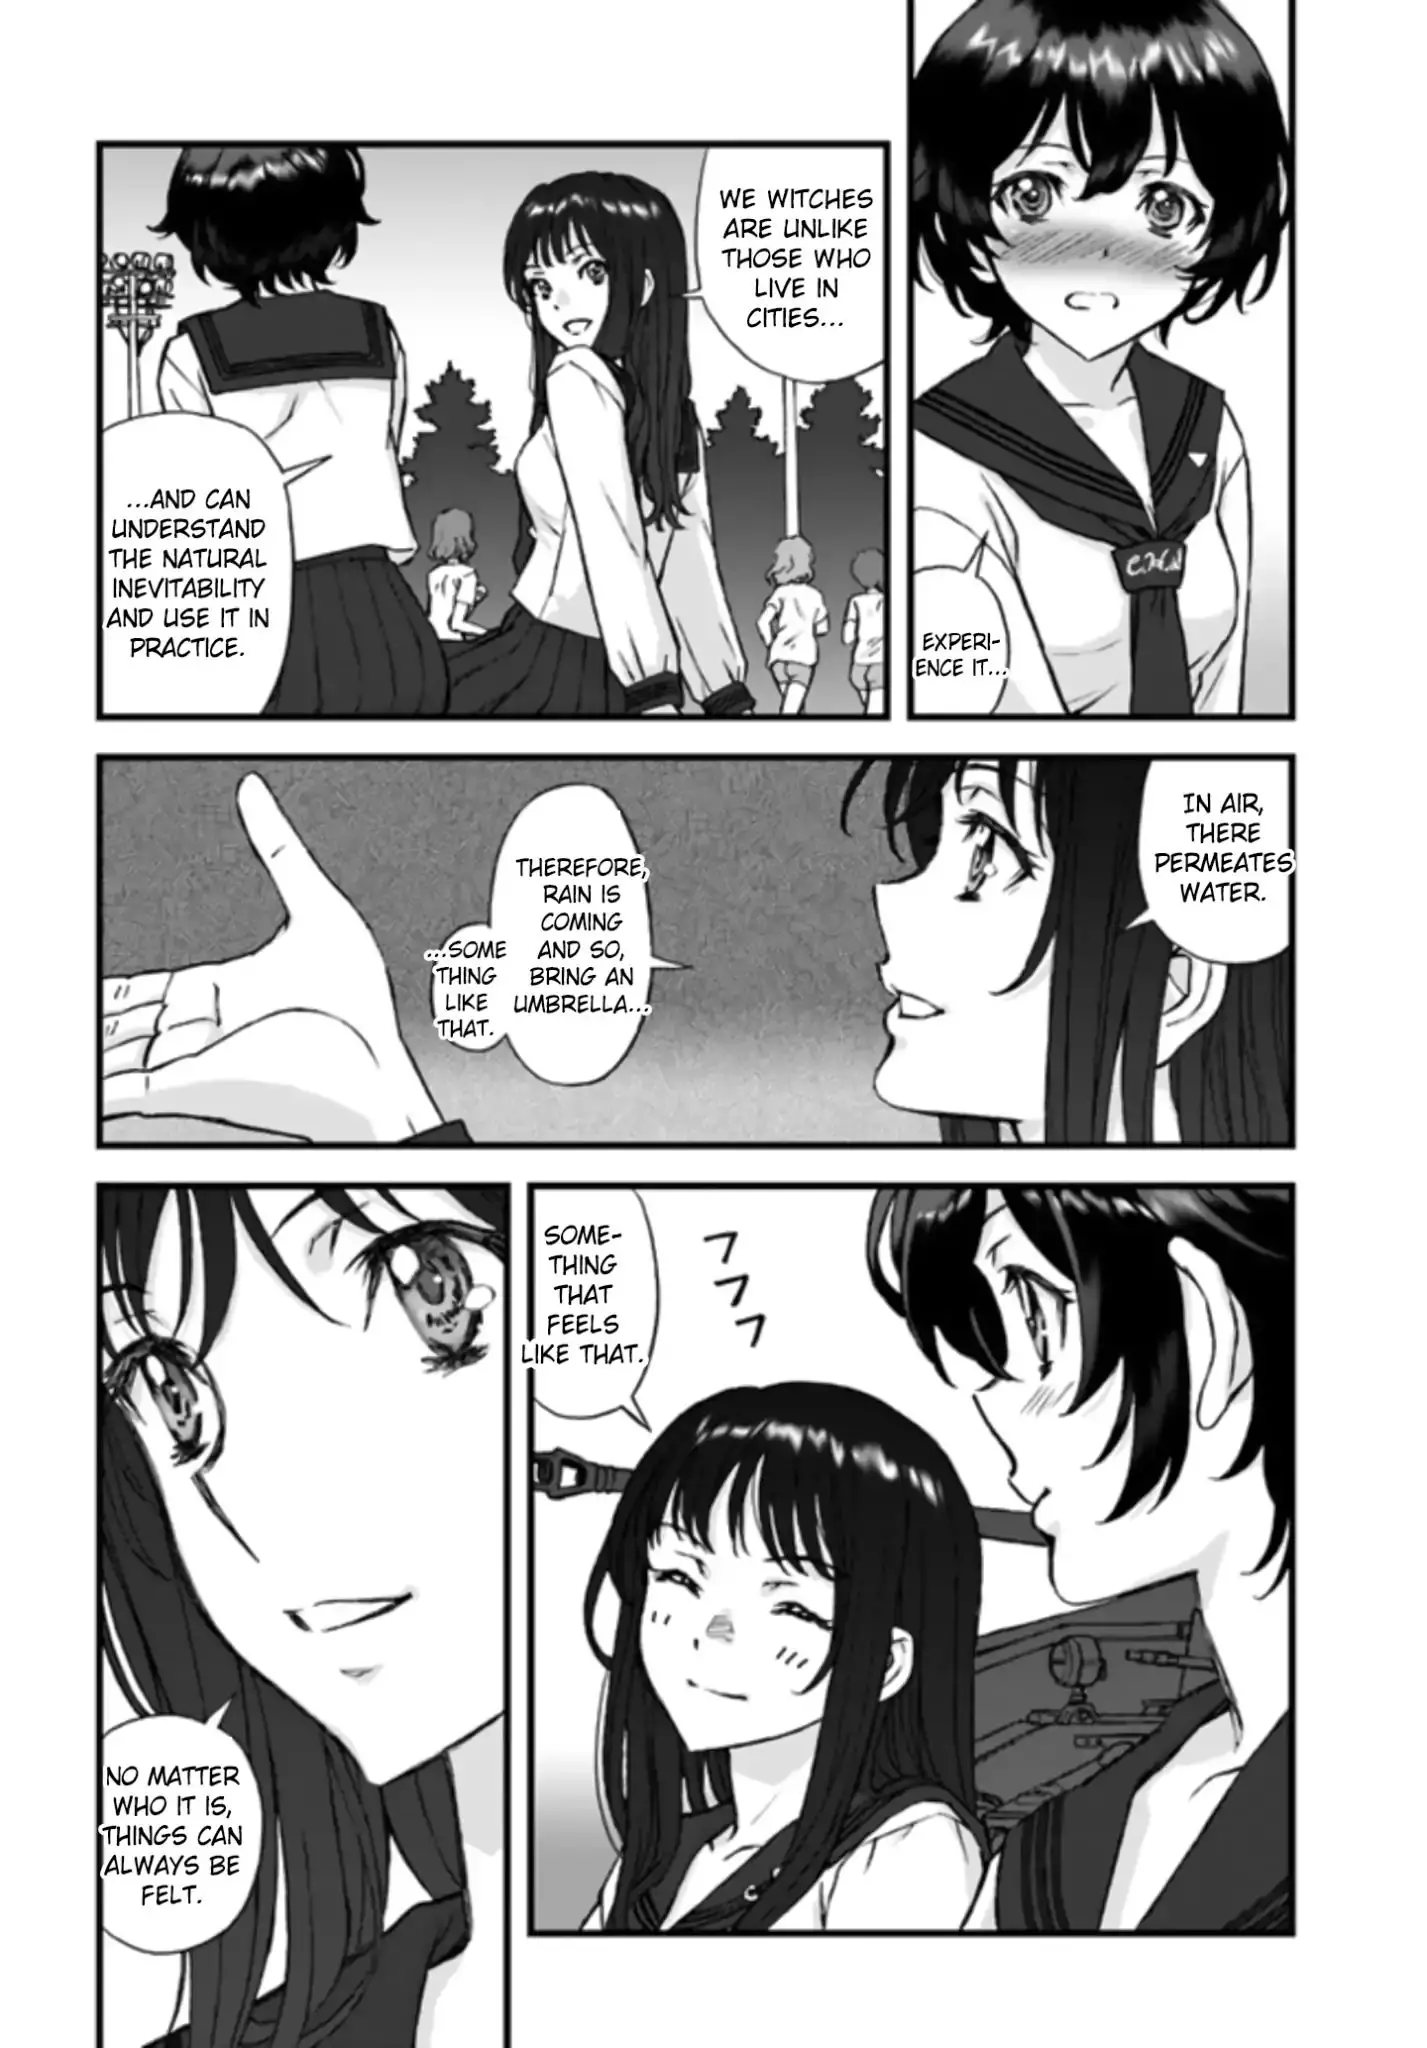 Girls Und Panzer - The Fir Tree And The Iron-Winged Witch - 3 page 15